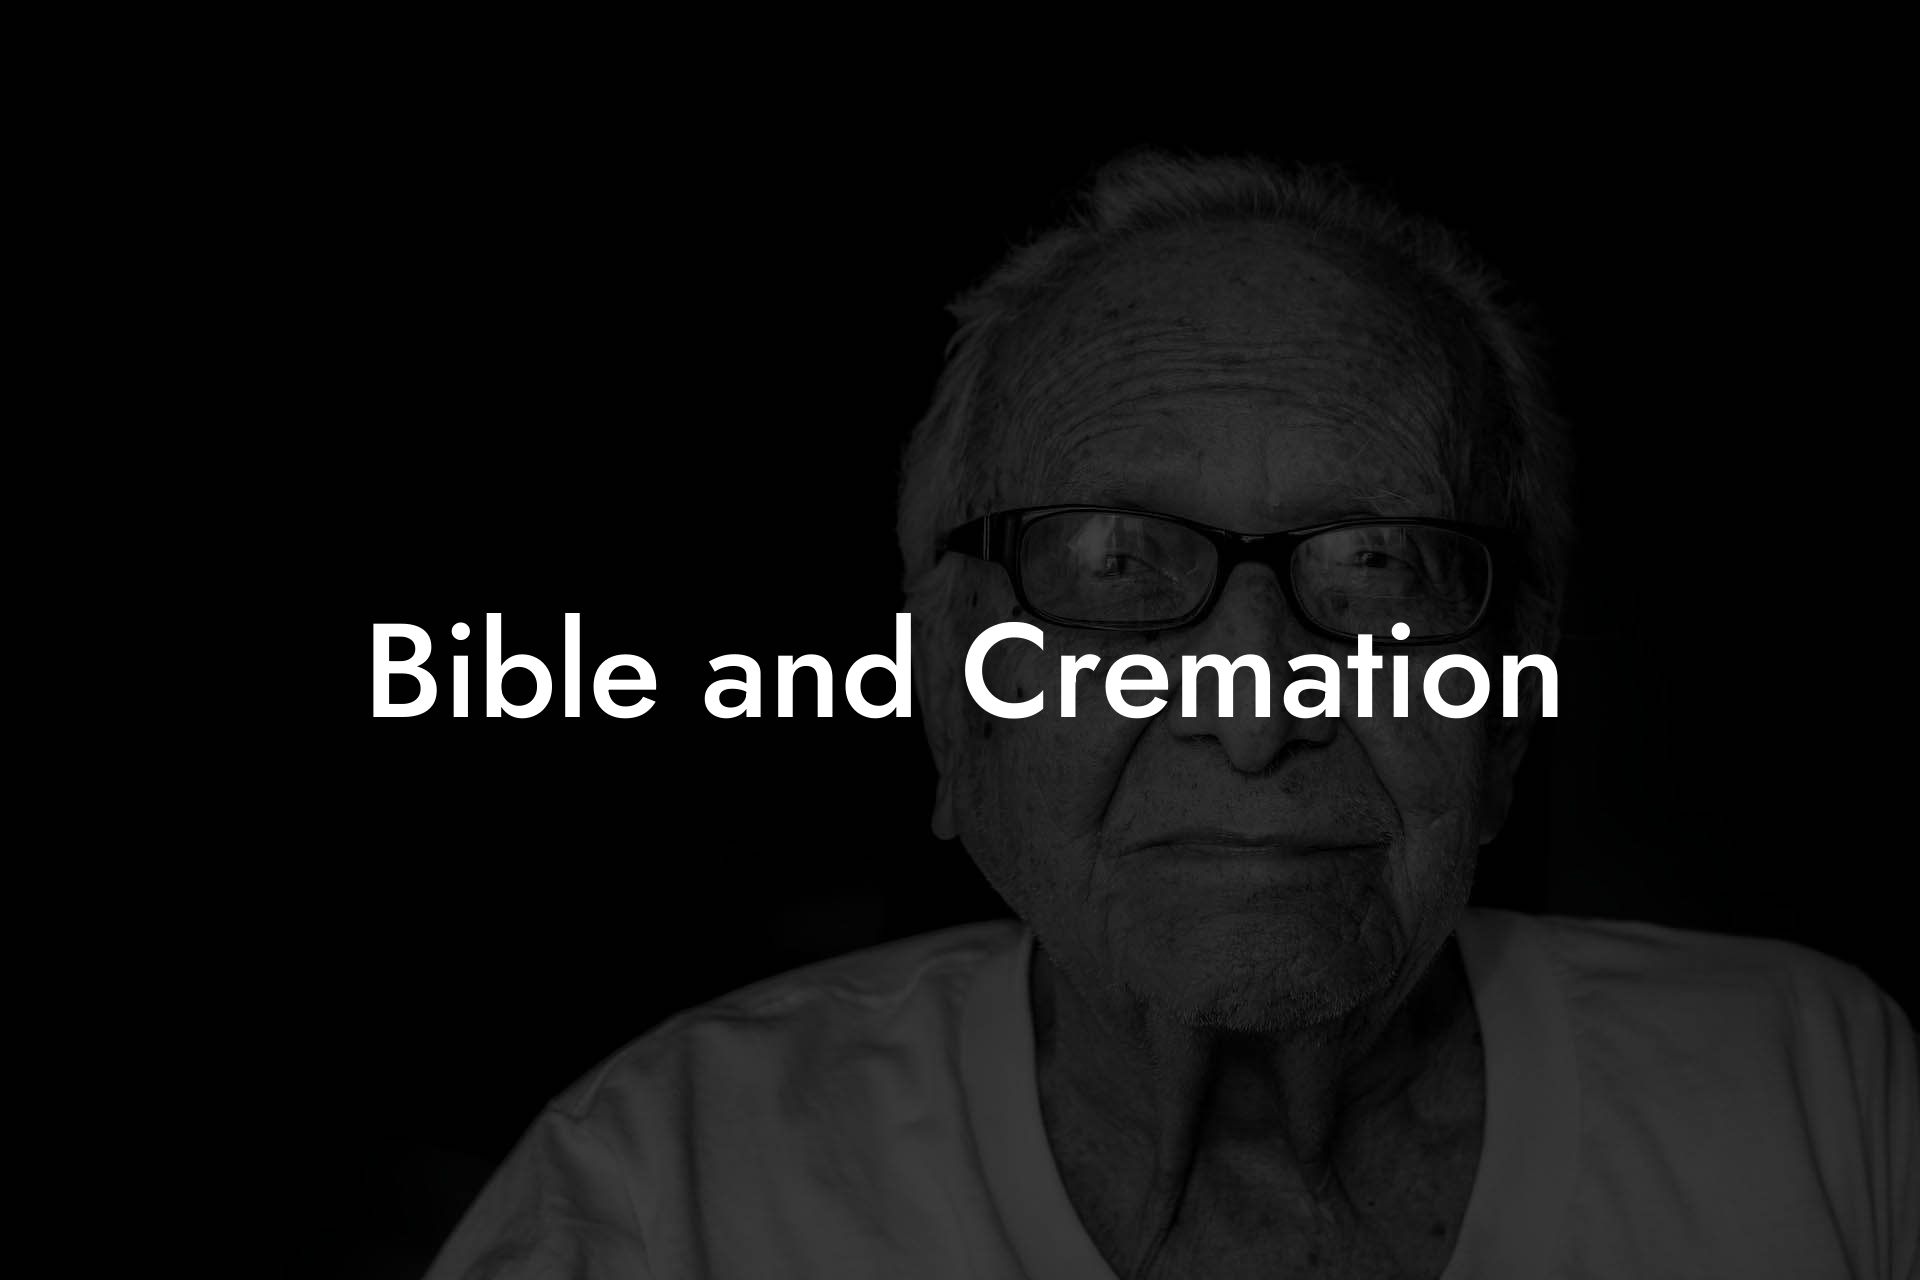 Bible and Cremation